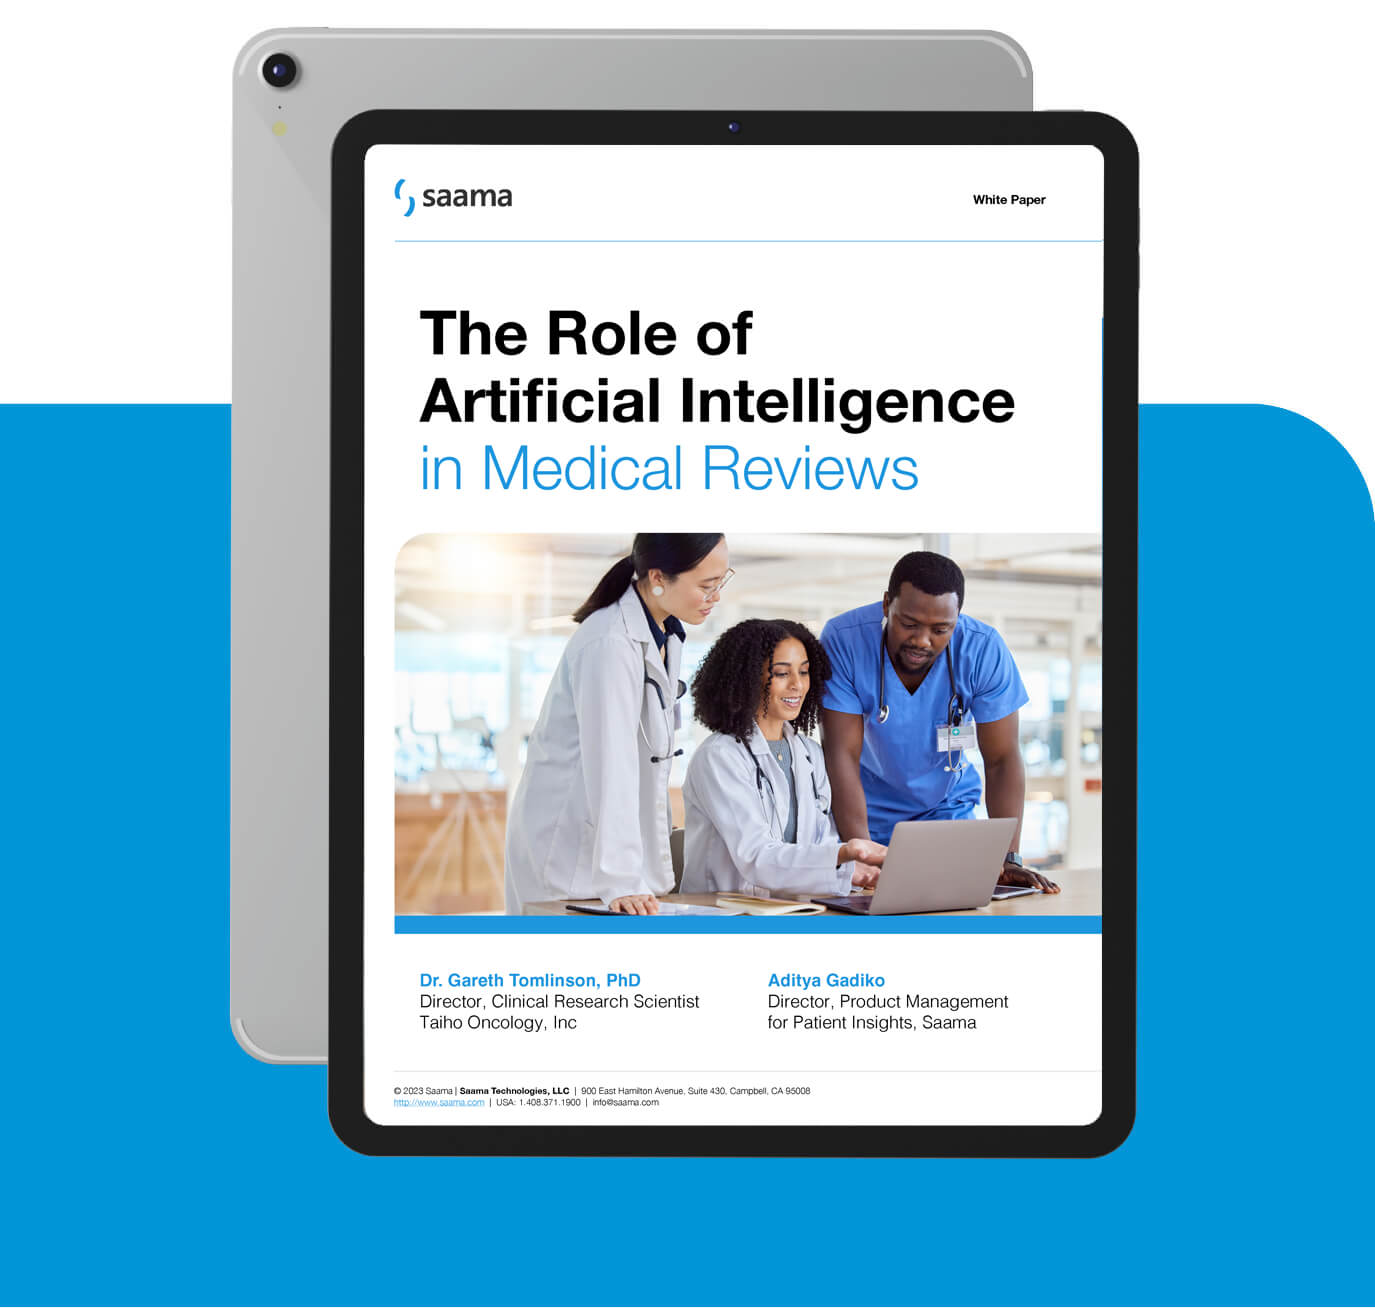 The Role of Artificial Intelligence in Medical Reviews